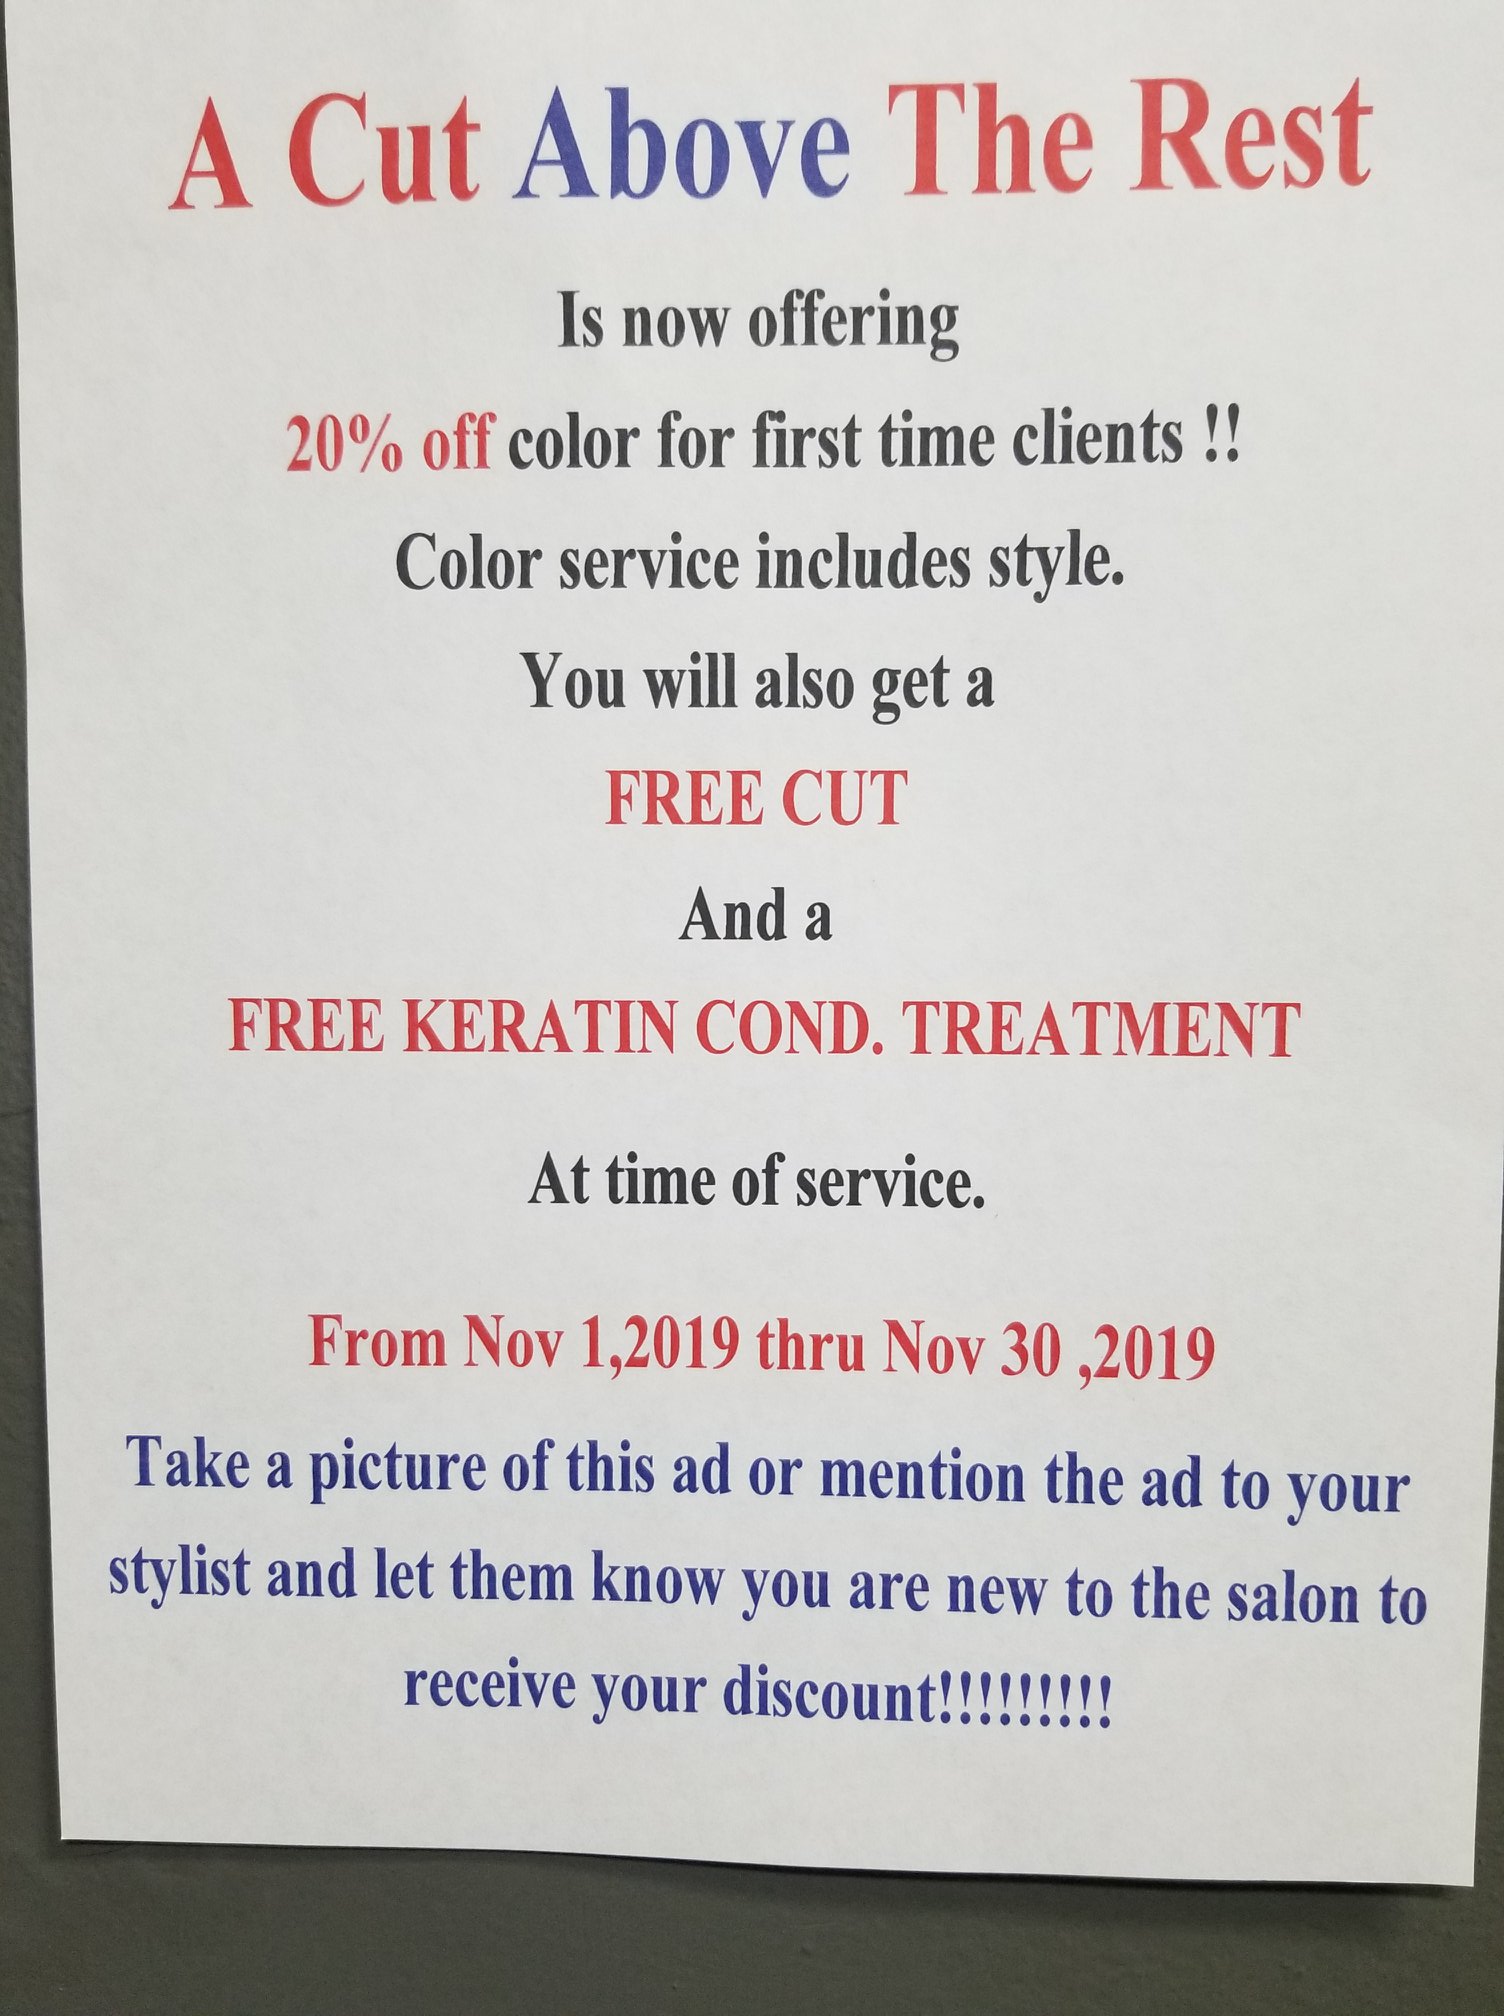 A Cut Above The Rest Family Hair Salon 1391 Delsea Dr, Deptford New Jersey 08096